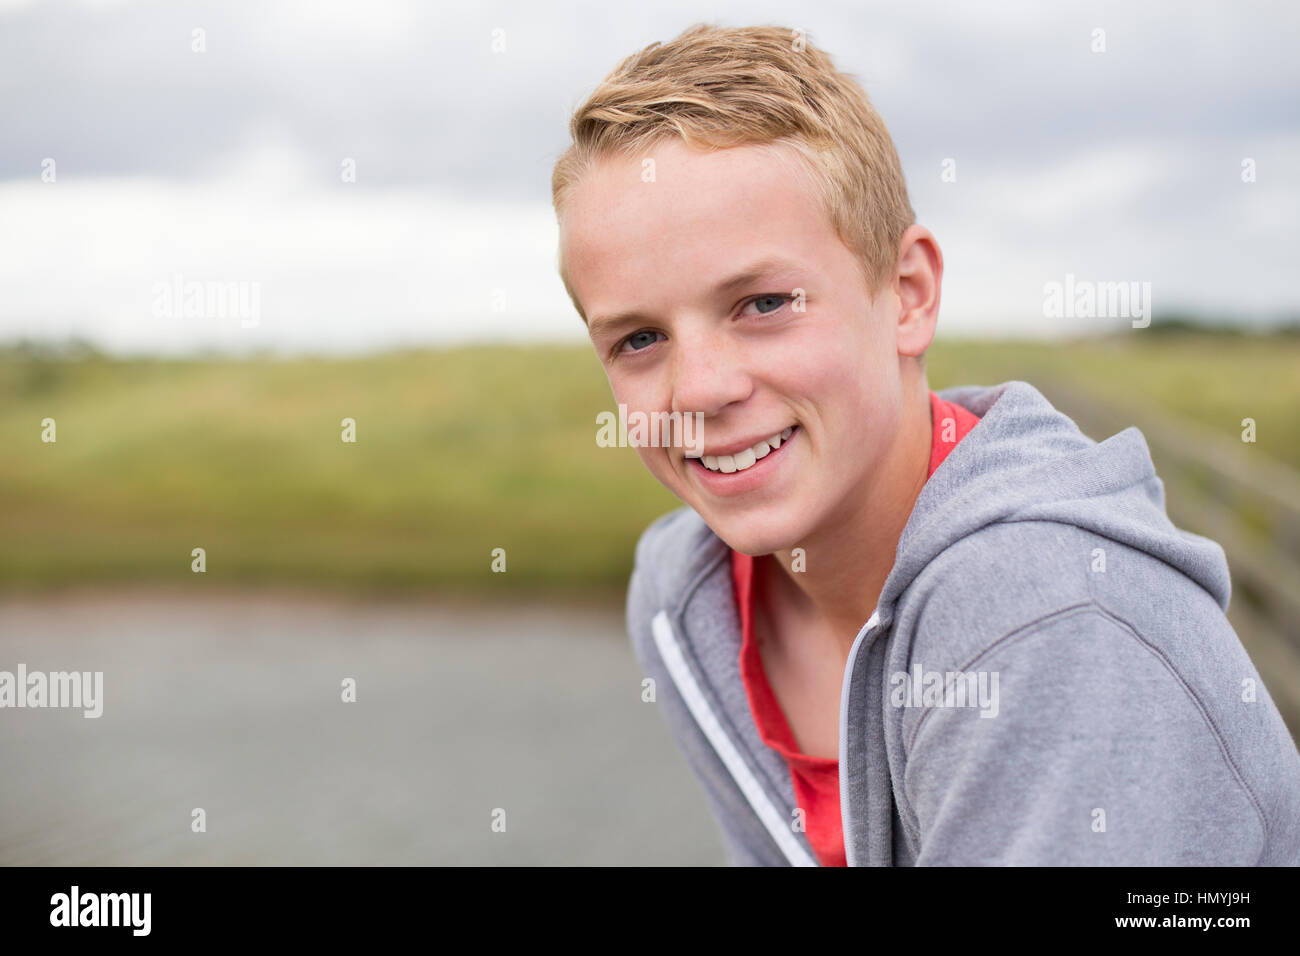 Portrait of a teenage boy smiling at the camera. He is outdoors and wearing casual clothing. Stock Photo